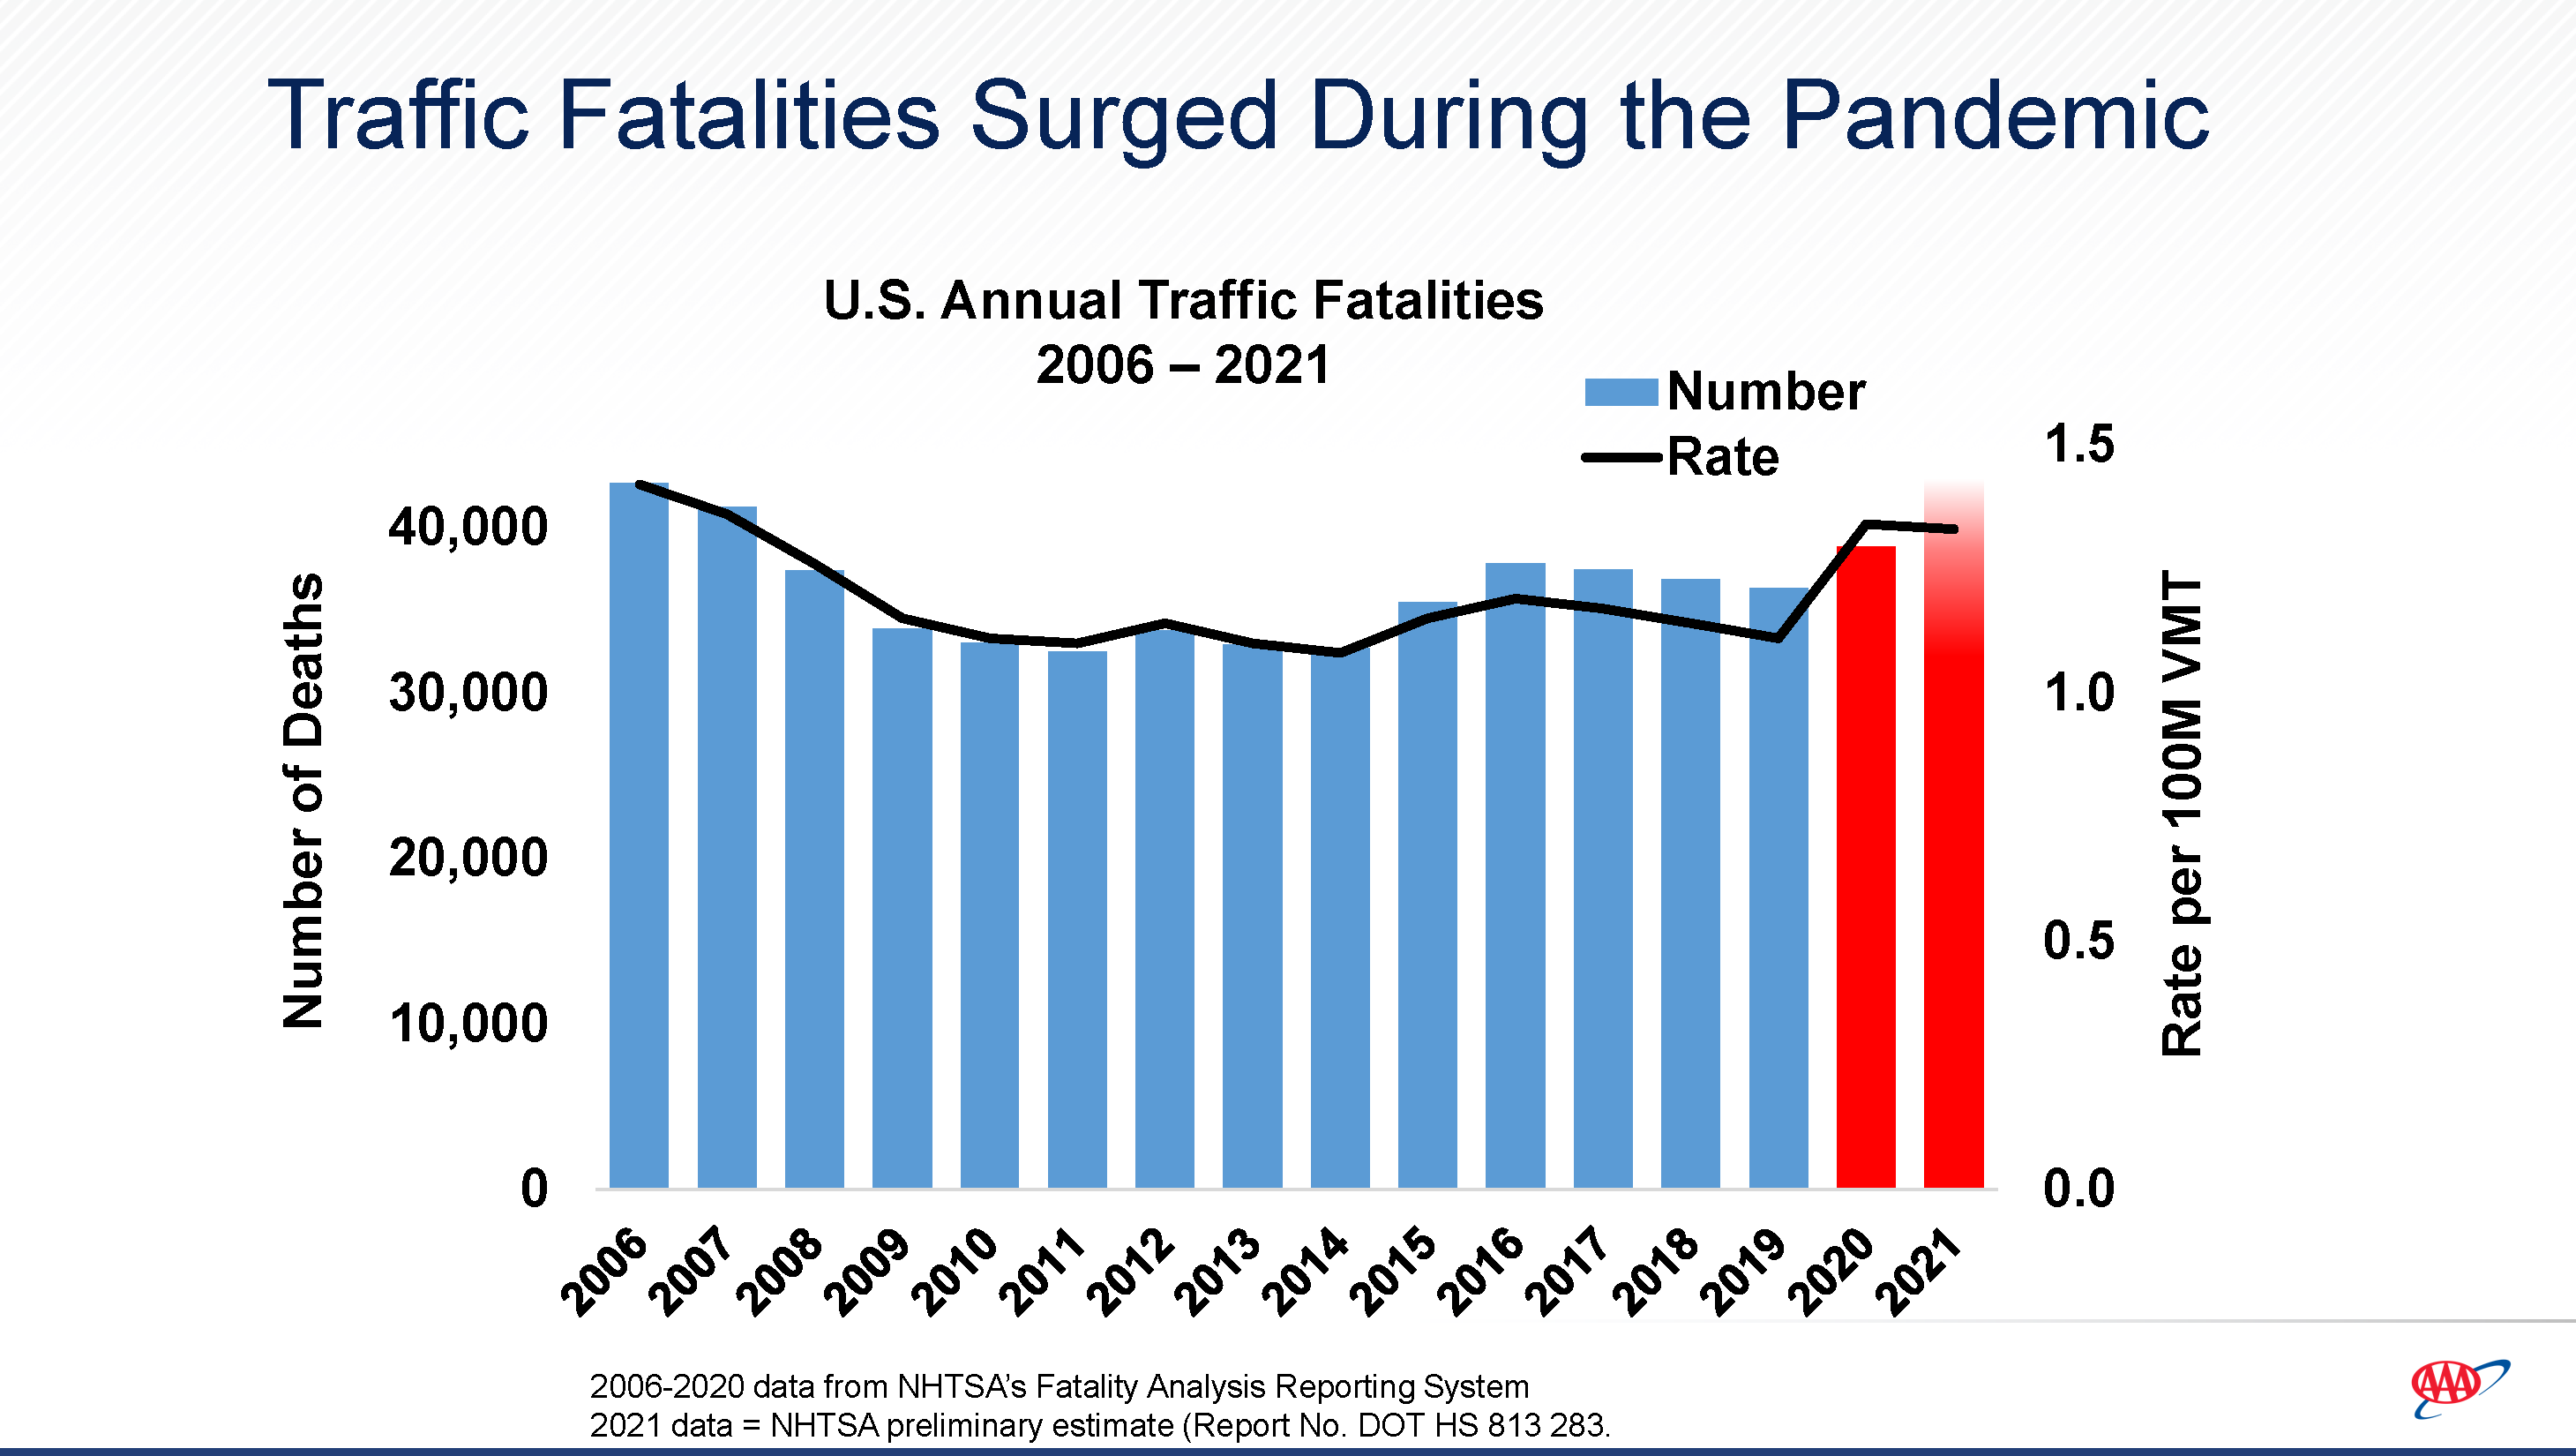 Dangerous Drivers: Unsafe driving behaviors are on the rise